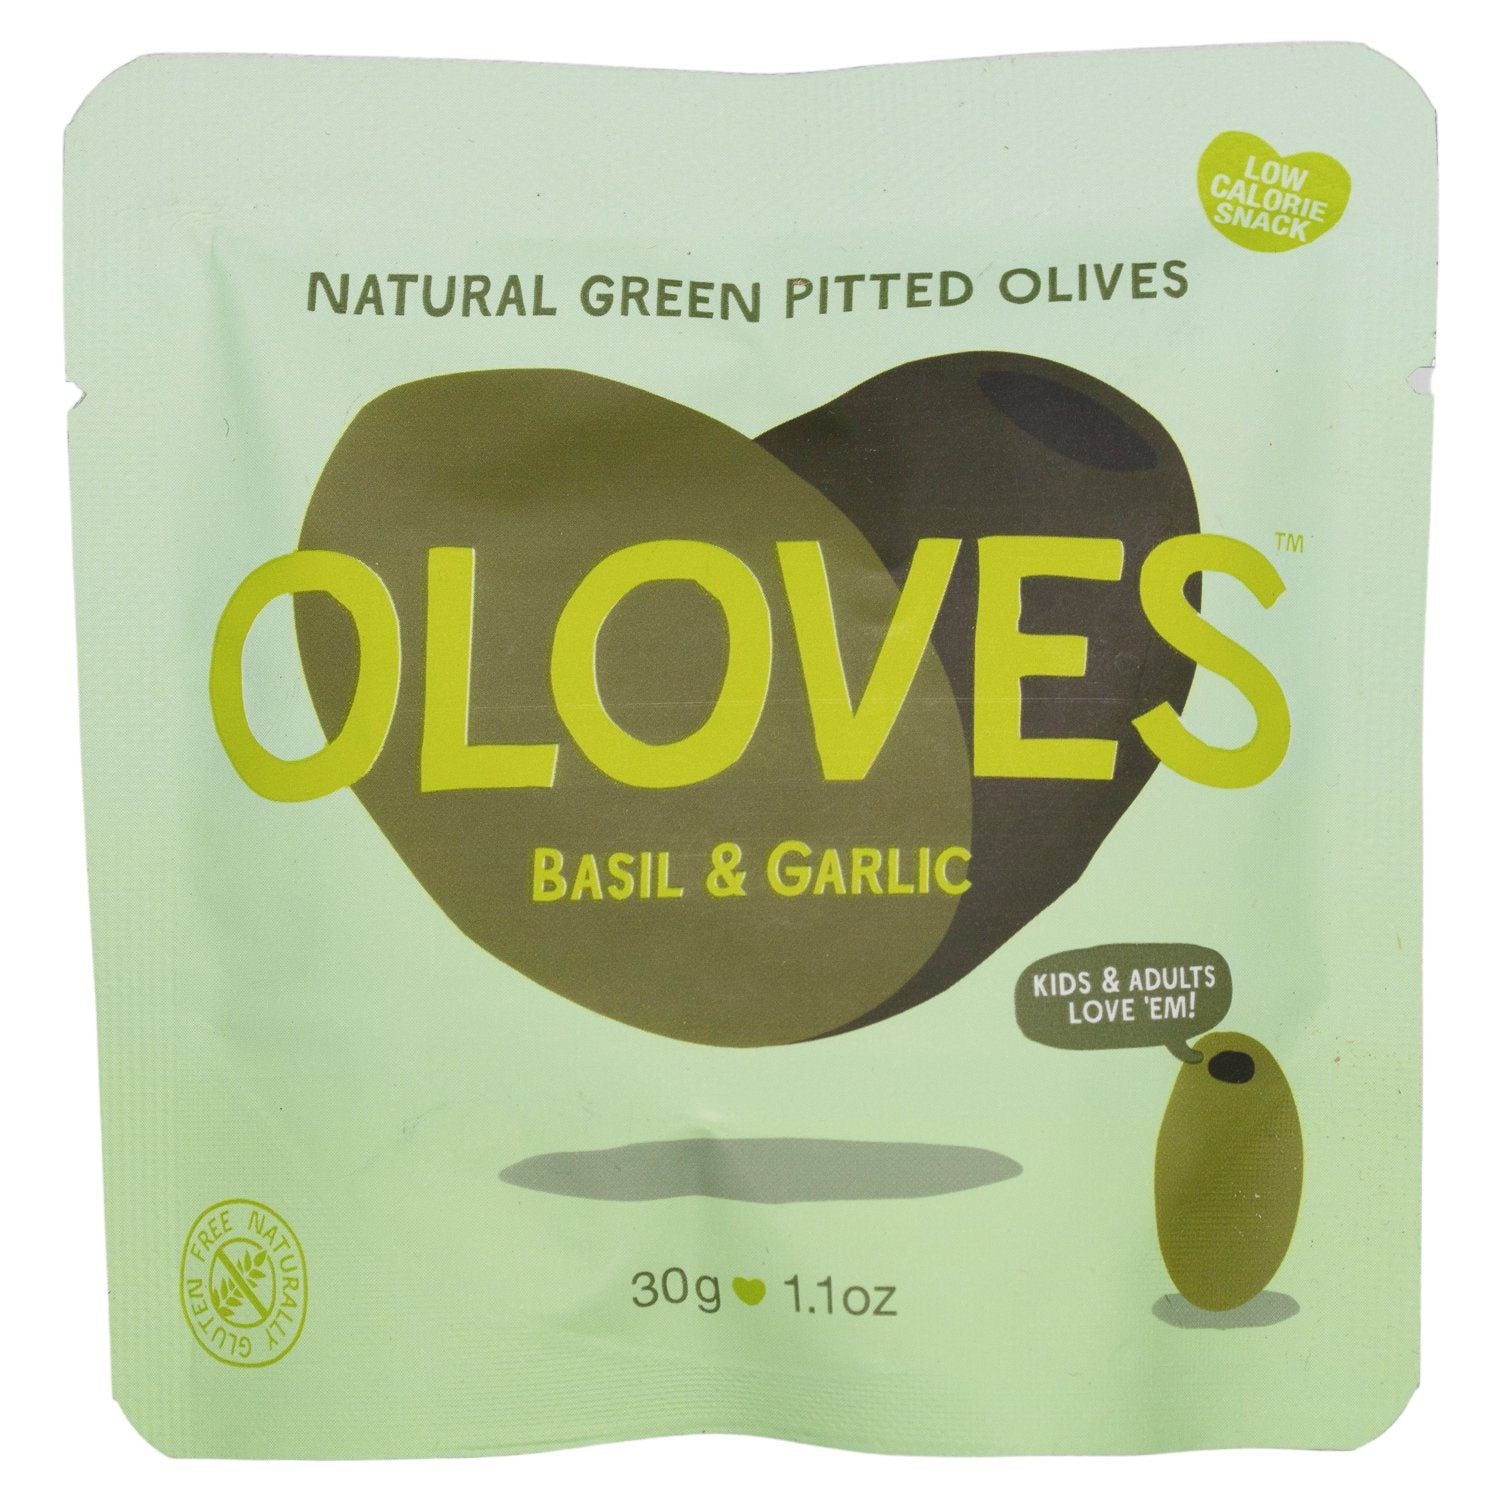 OLOVES Natural Whole Pitted Olives Elma Farms Basil & Garlic 1.1 Ounce 